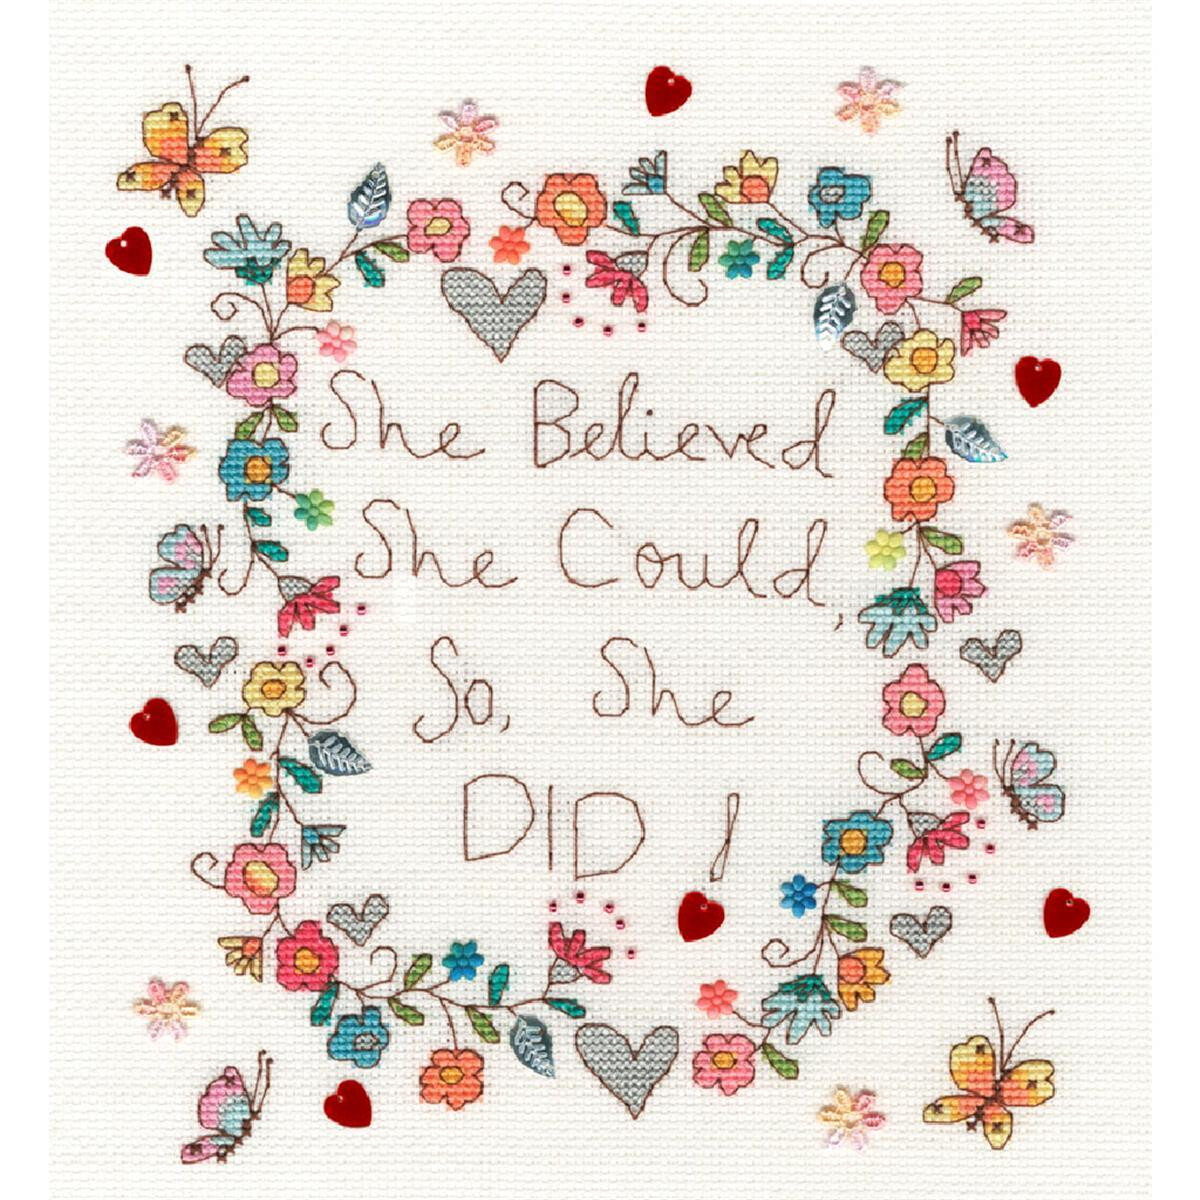 An embroidered design features the phrase She thought she...